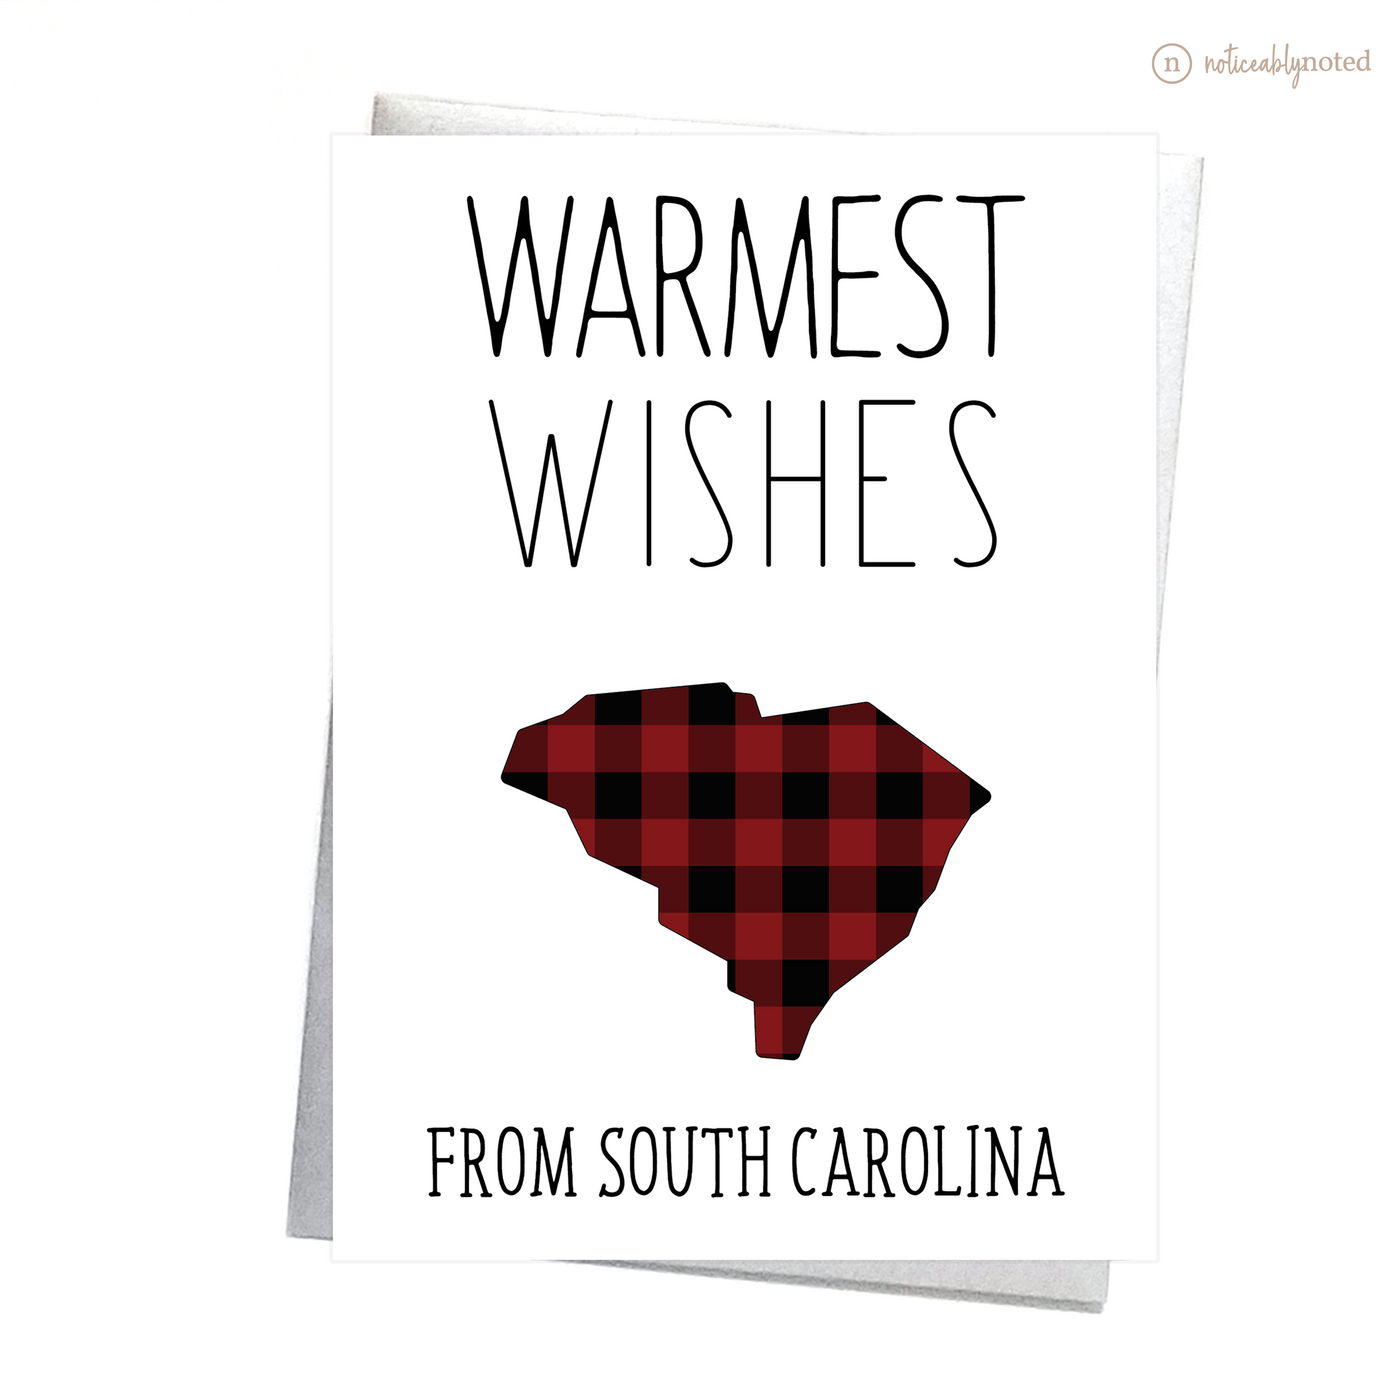 South Carolina Christmas Cards | Noticeably Noted